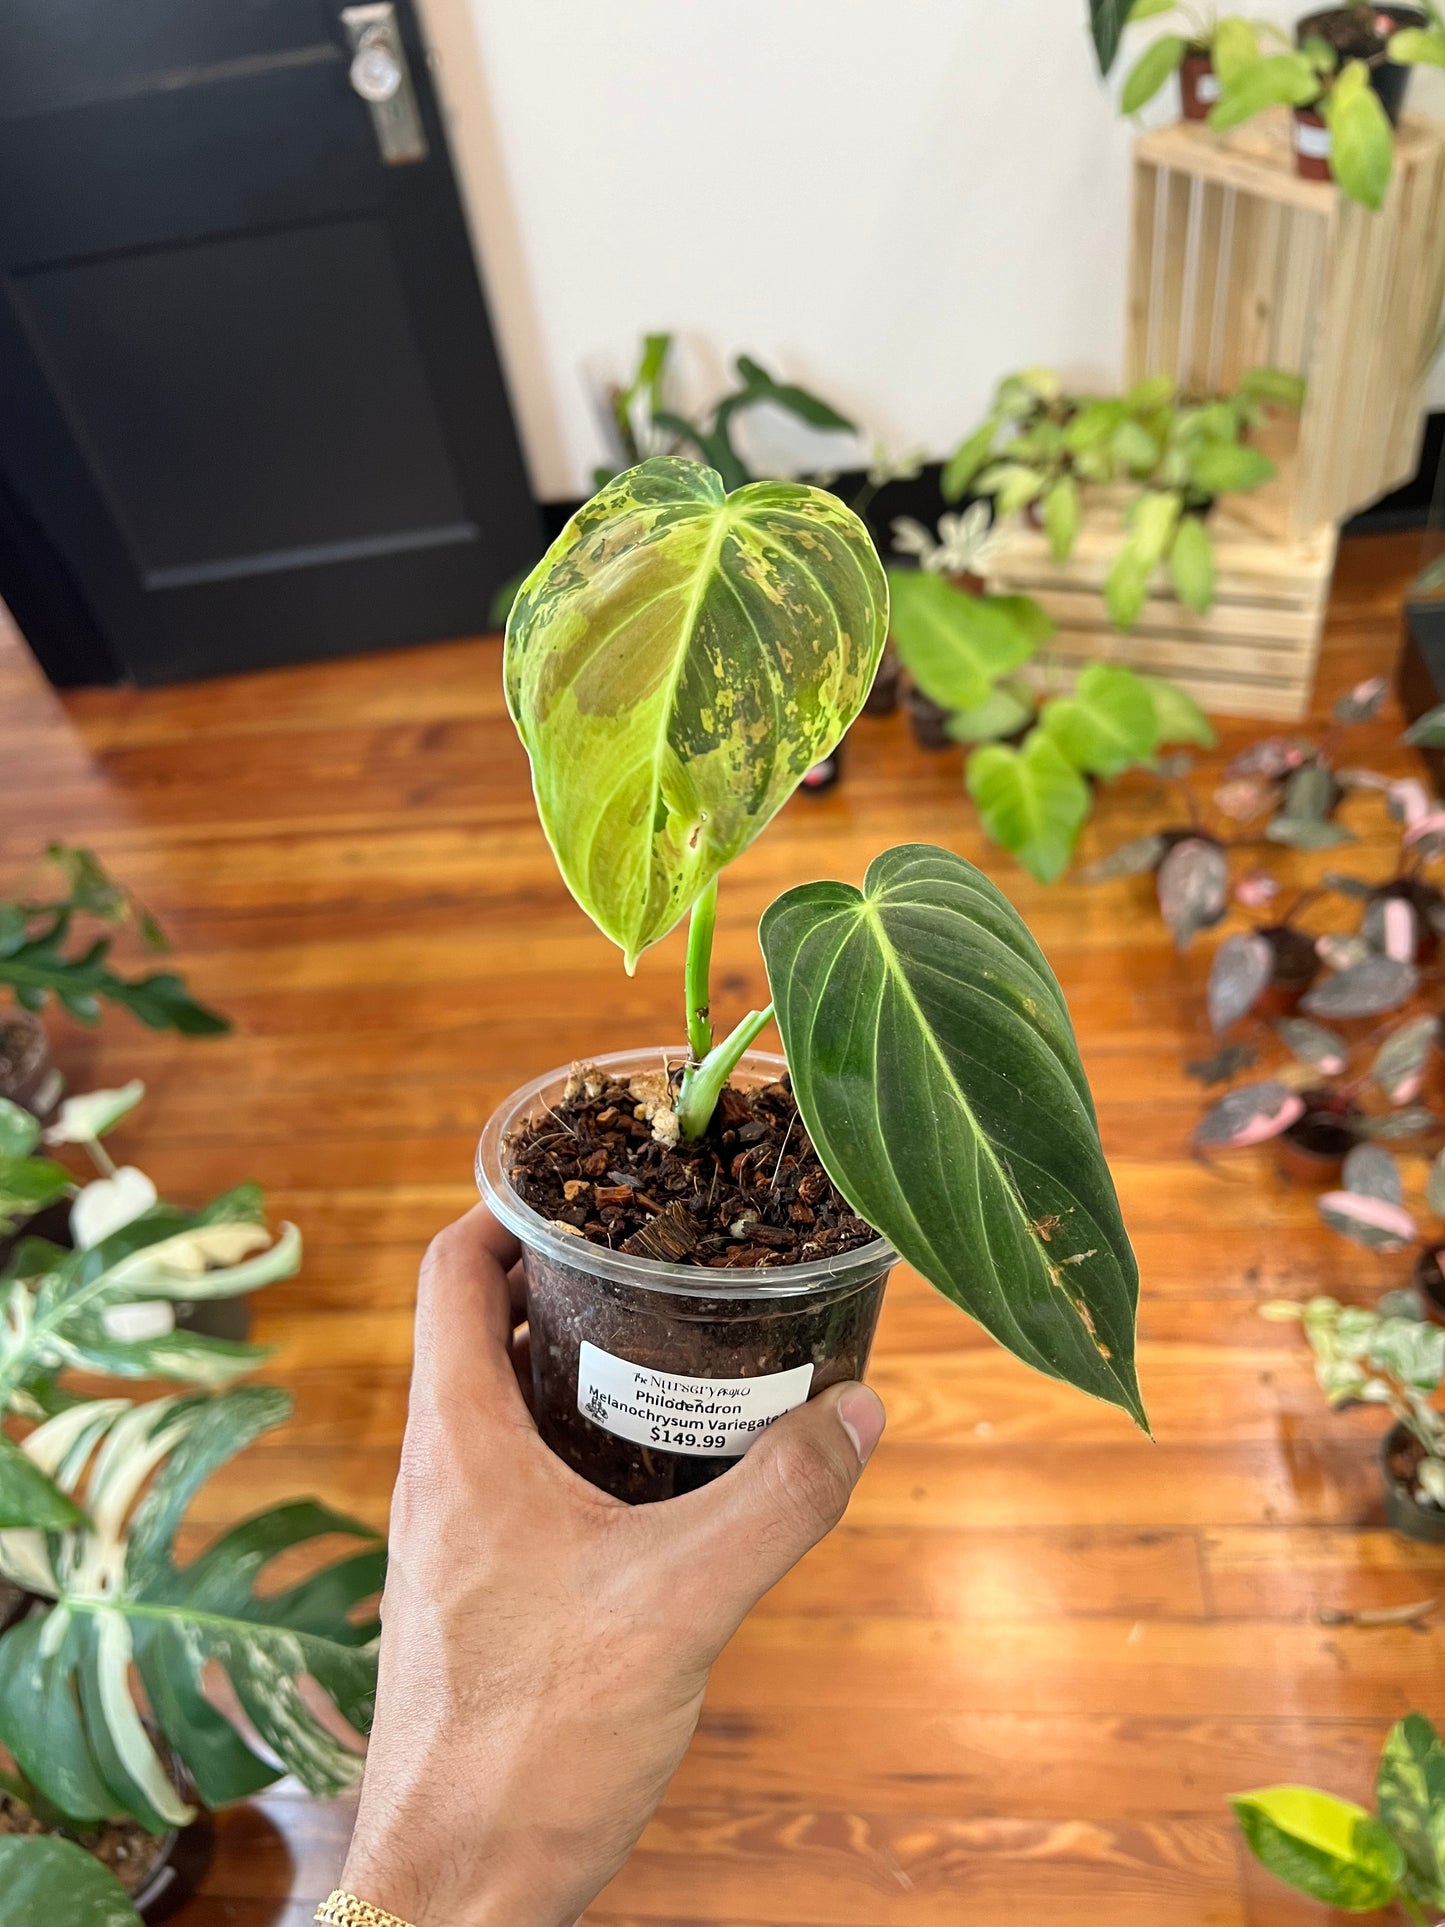 Philodendron Melanochrysum Variegated 4”